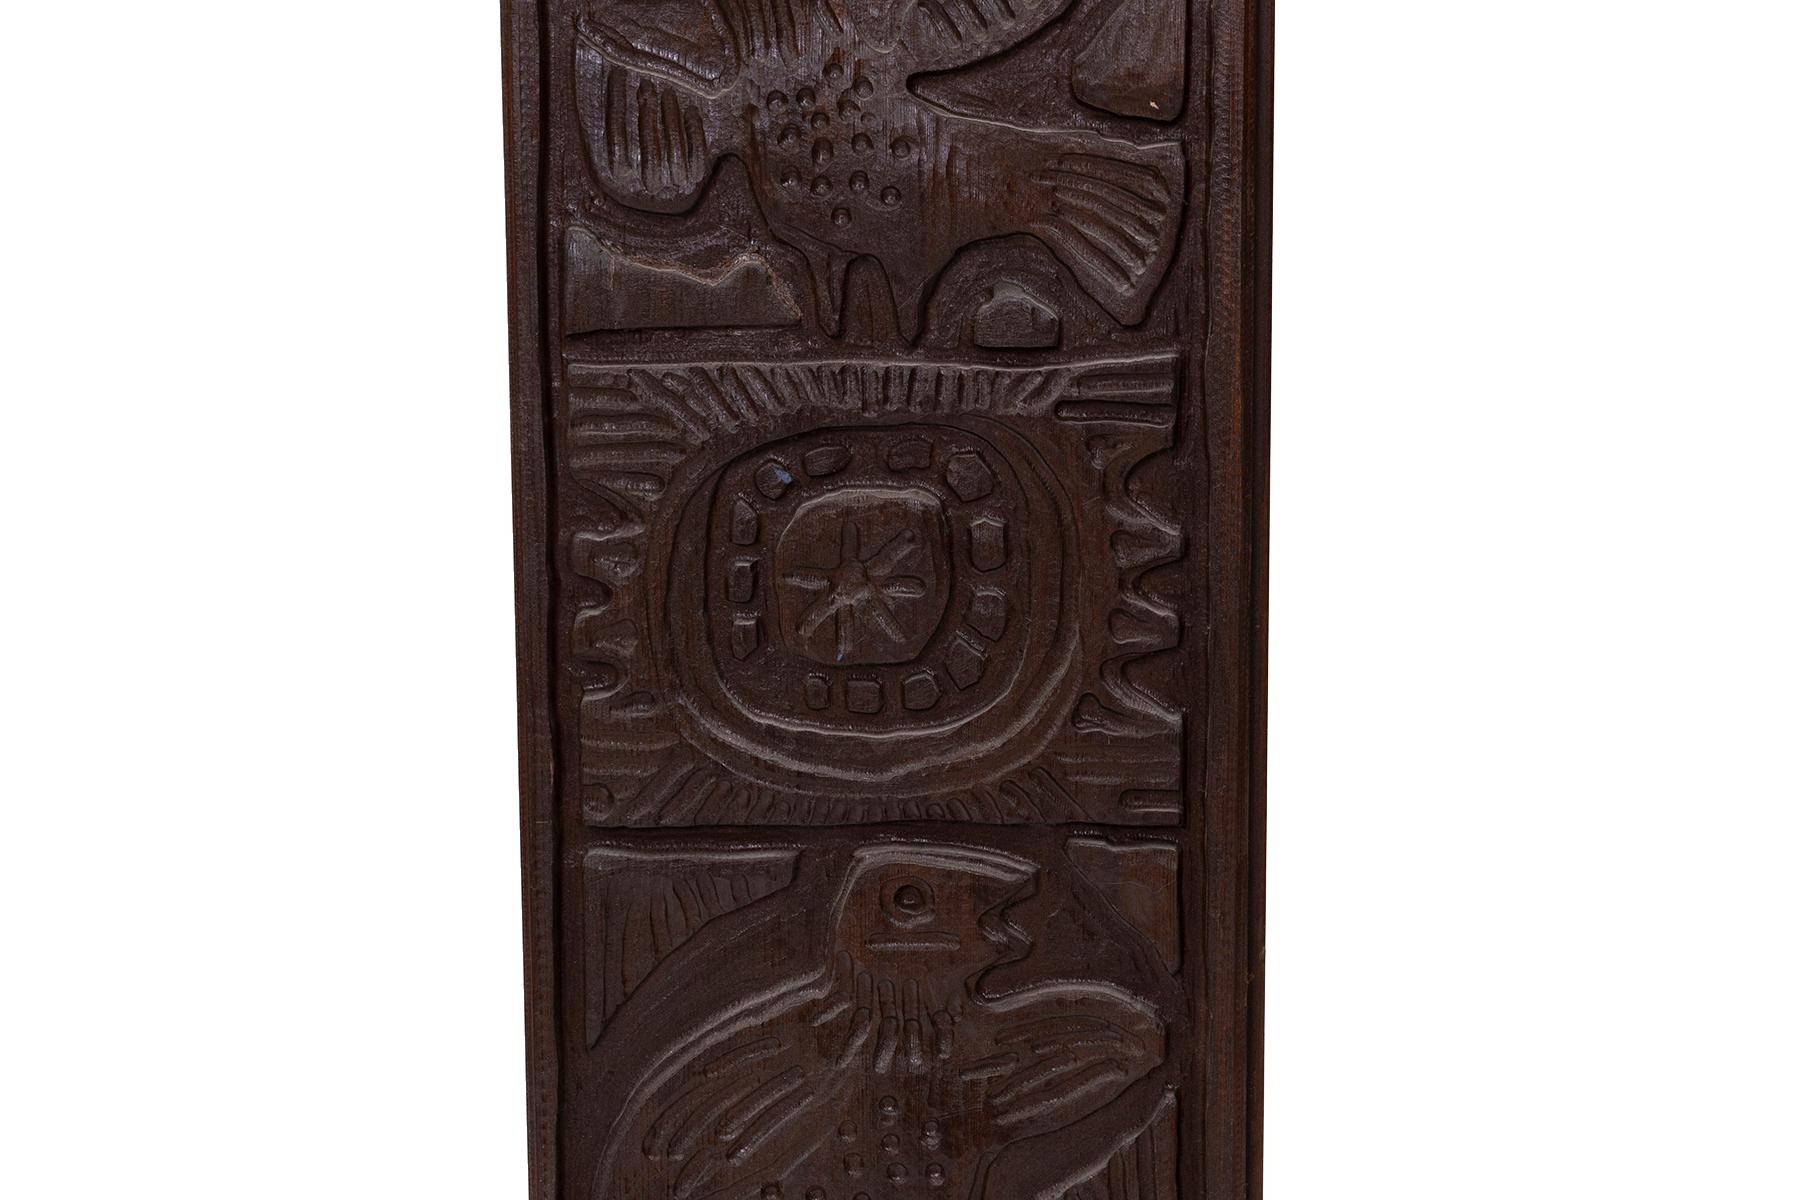 Wood Evelyn Ackerman Panelcarve Redwood 1960's Panels For Sale